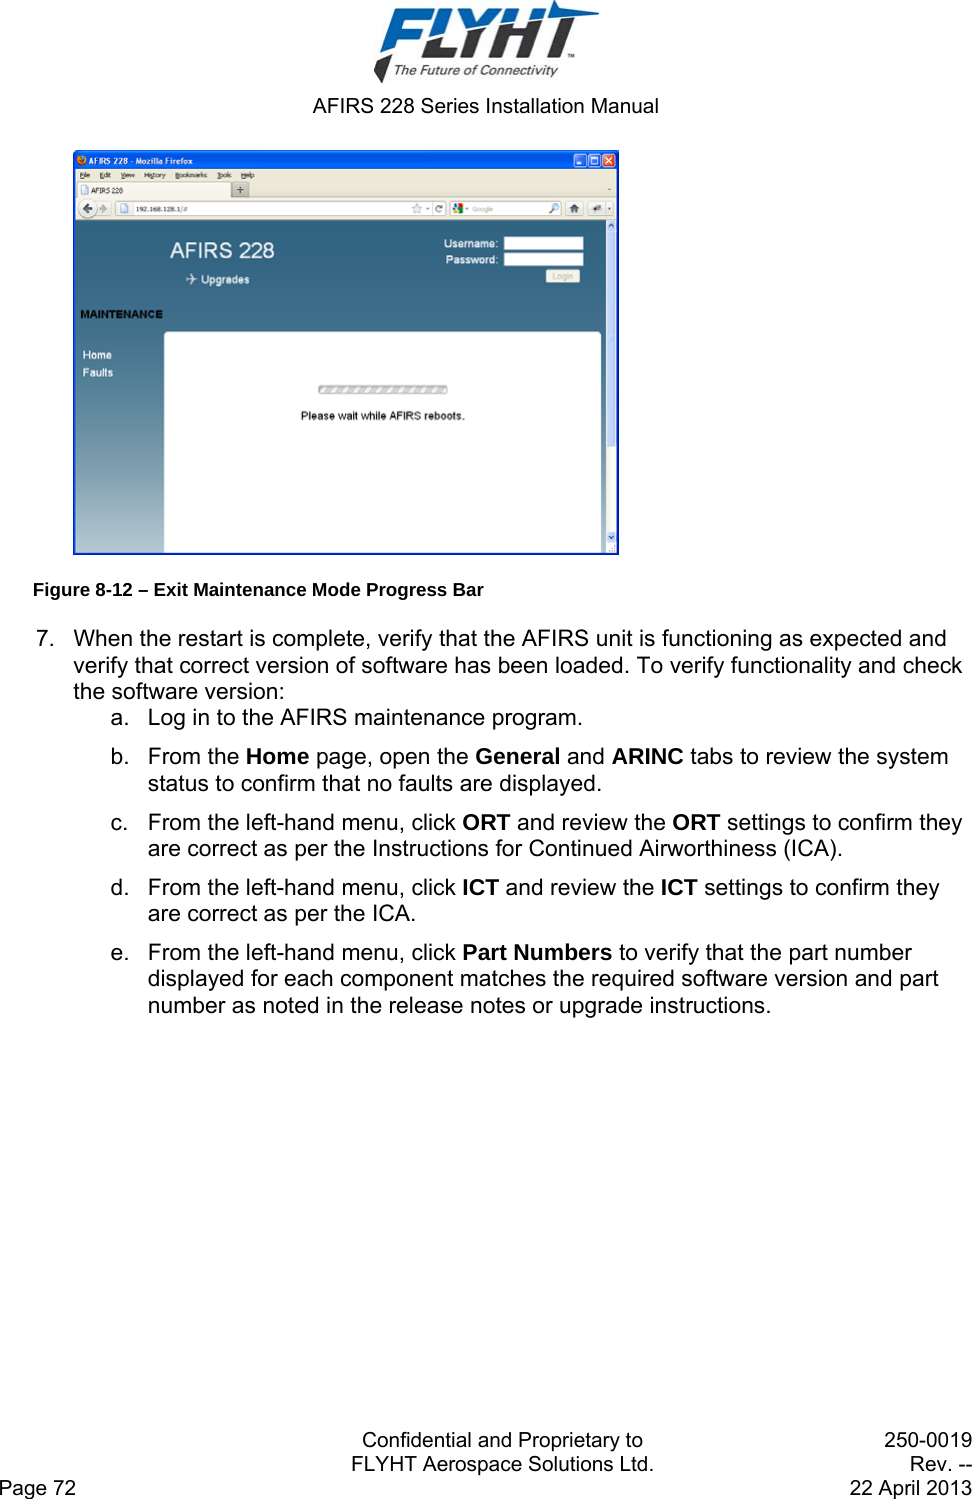  AFIRS 228 Series Installation Manual   Confidential and Proprietary to  250-0019   FLYHT Aerospace Solutions Ltd.  Rev. -- Page 72    22 April 2013  Figure 8-12 – Exit Maintenance Mode Progress Bar 7.  When the restart is complete, verify that the AFIRS unit is functioning as expected and verify that correct version of software has been loaded. To verify functionality and check the software version:  a.  Log in to the AFIRS maintenance program.  b. From the Home page, open the General and ARINC tabs to review the system status to confirm that no faults are displayed. c.  From the left-hand menu, click ORT and review the ORT settings to confirm they are correct as per the Instructions for Continued Airworthiness (ICA). d.  From the left-hand menu, click ICT and review the ICT settings to confirm they are correct as per the ICA. e.  From the left-hand menu, click Part Numbers to verify that the part number displayed for each component matches the required software version and part number as noted in the release notes or upgrade instructions.  